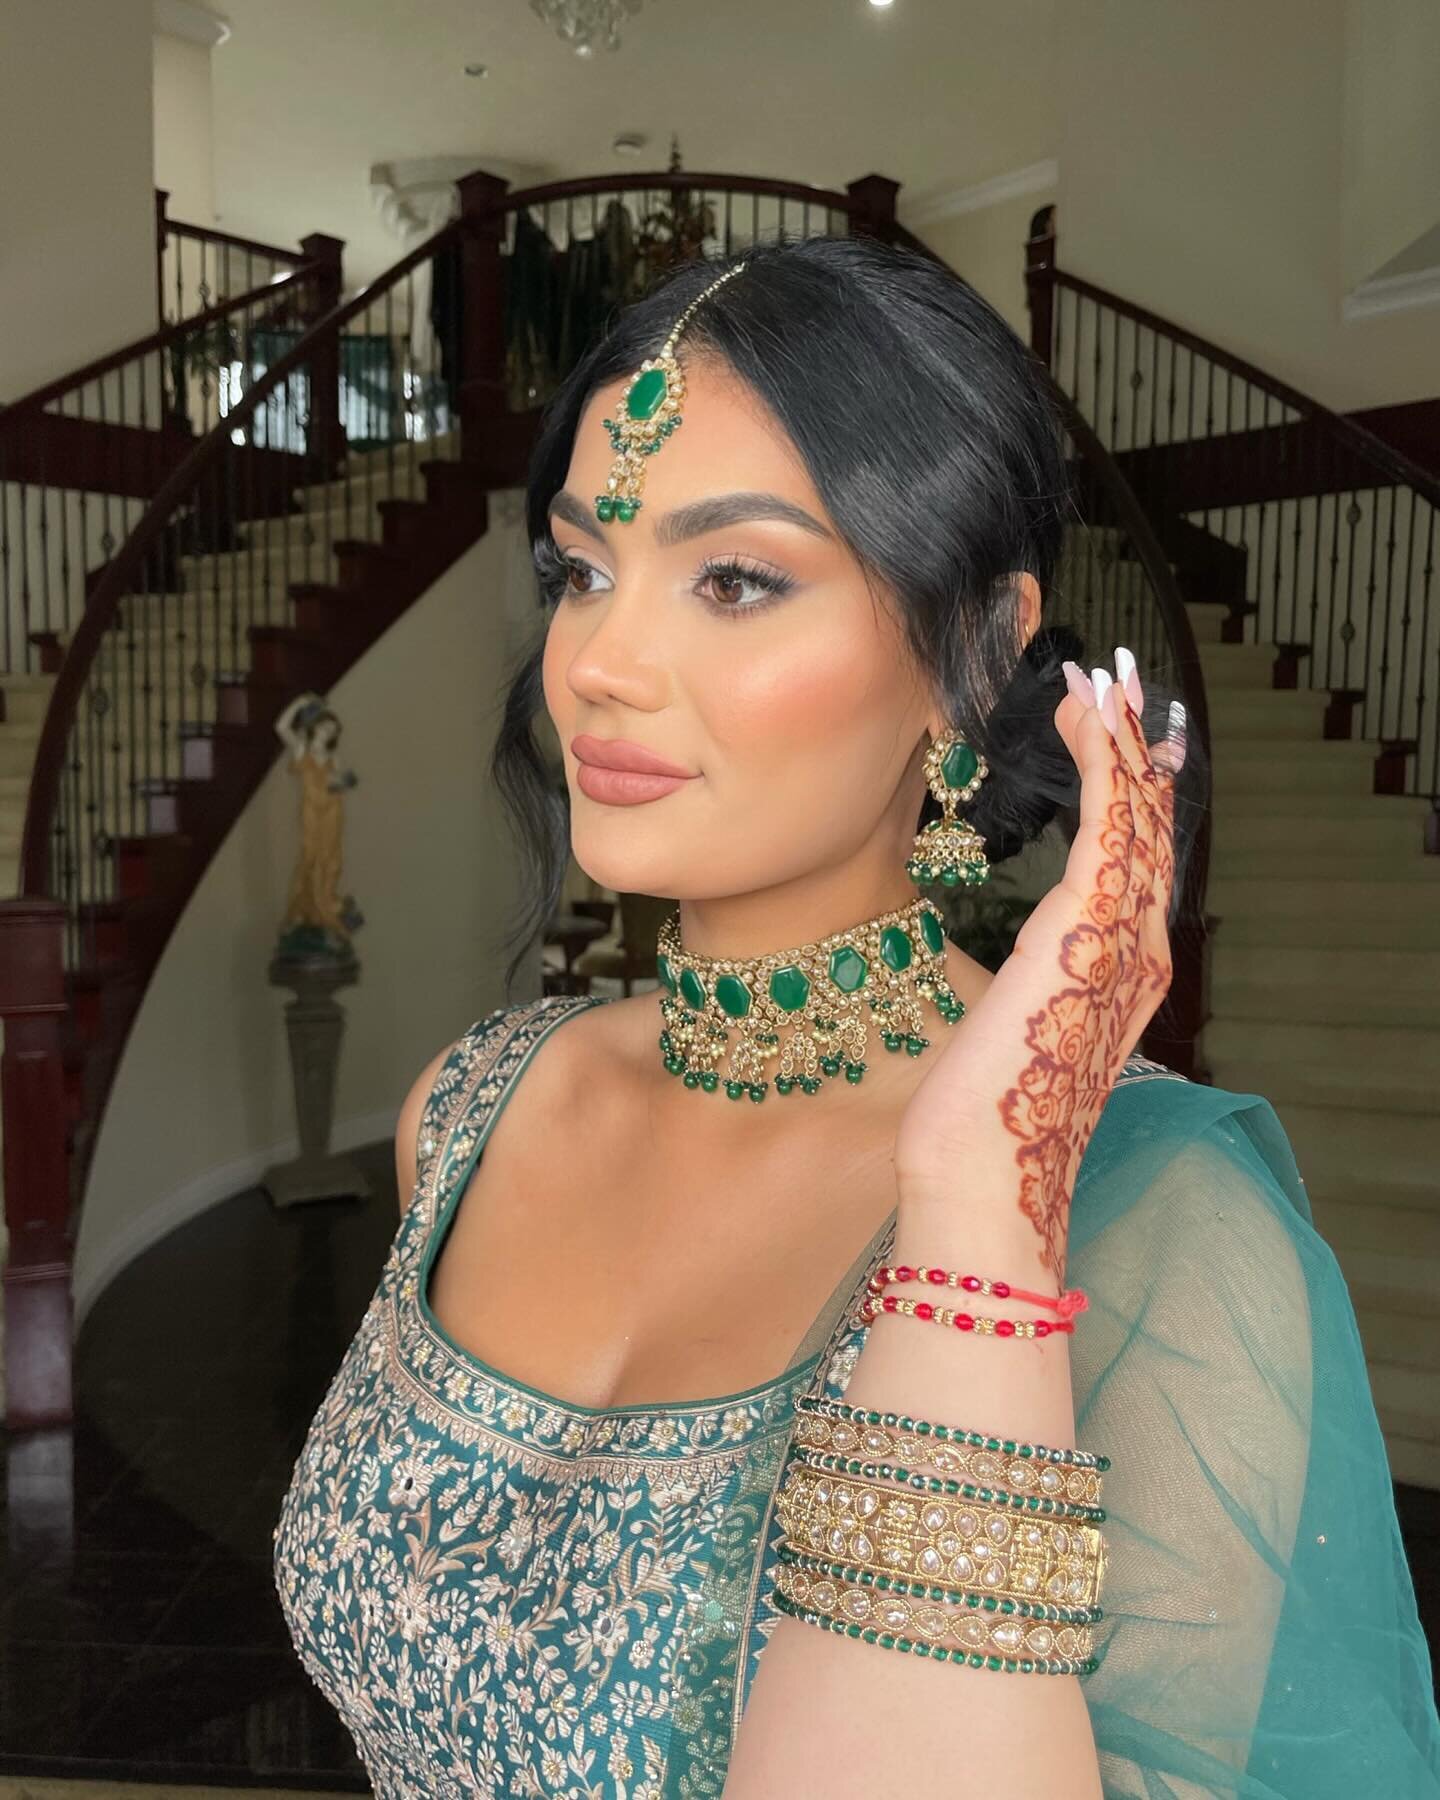 📢Exciting news for South Asian Wedding Guests! 🎉you can now enjoy discounts when booking in for multiple events for a wedding with my new South Asian Glam packages, which include hair, makeup, jewellery setting + chunni pinning! (also option to opt